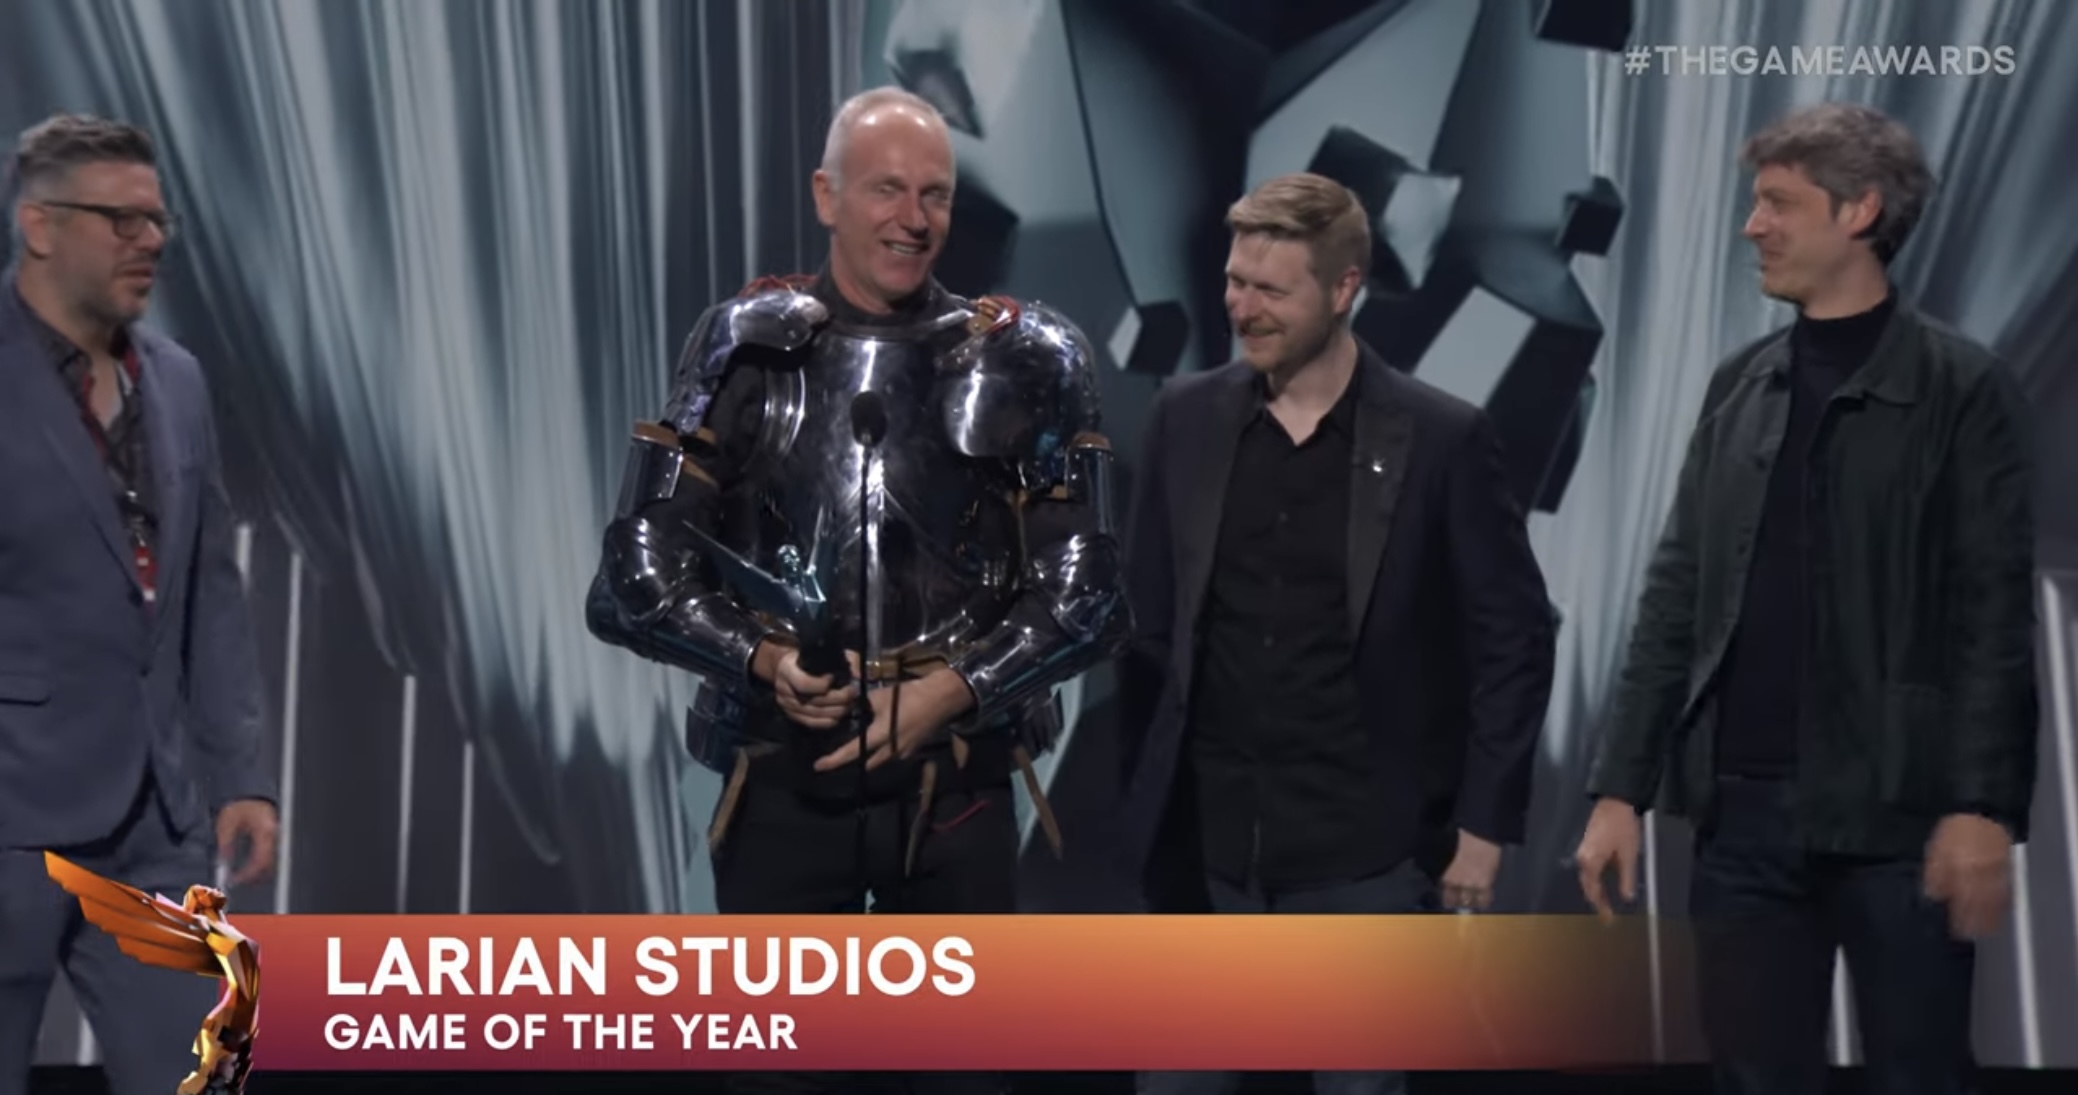 Larian CEO and founder Swen Vincke accepting the award for game of the year surrounded by developers.